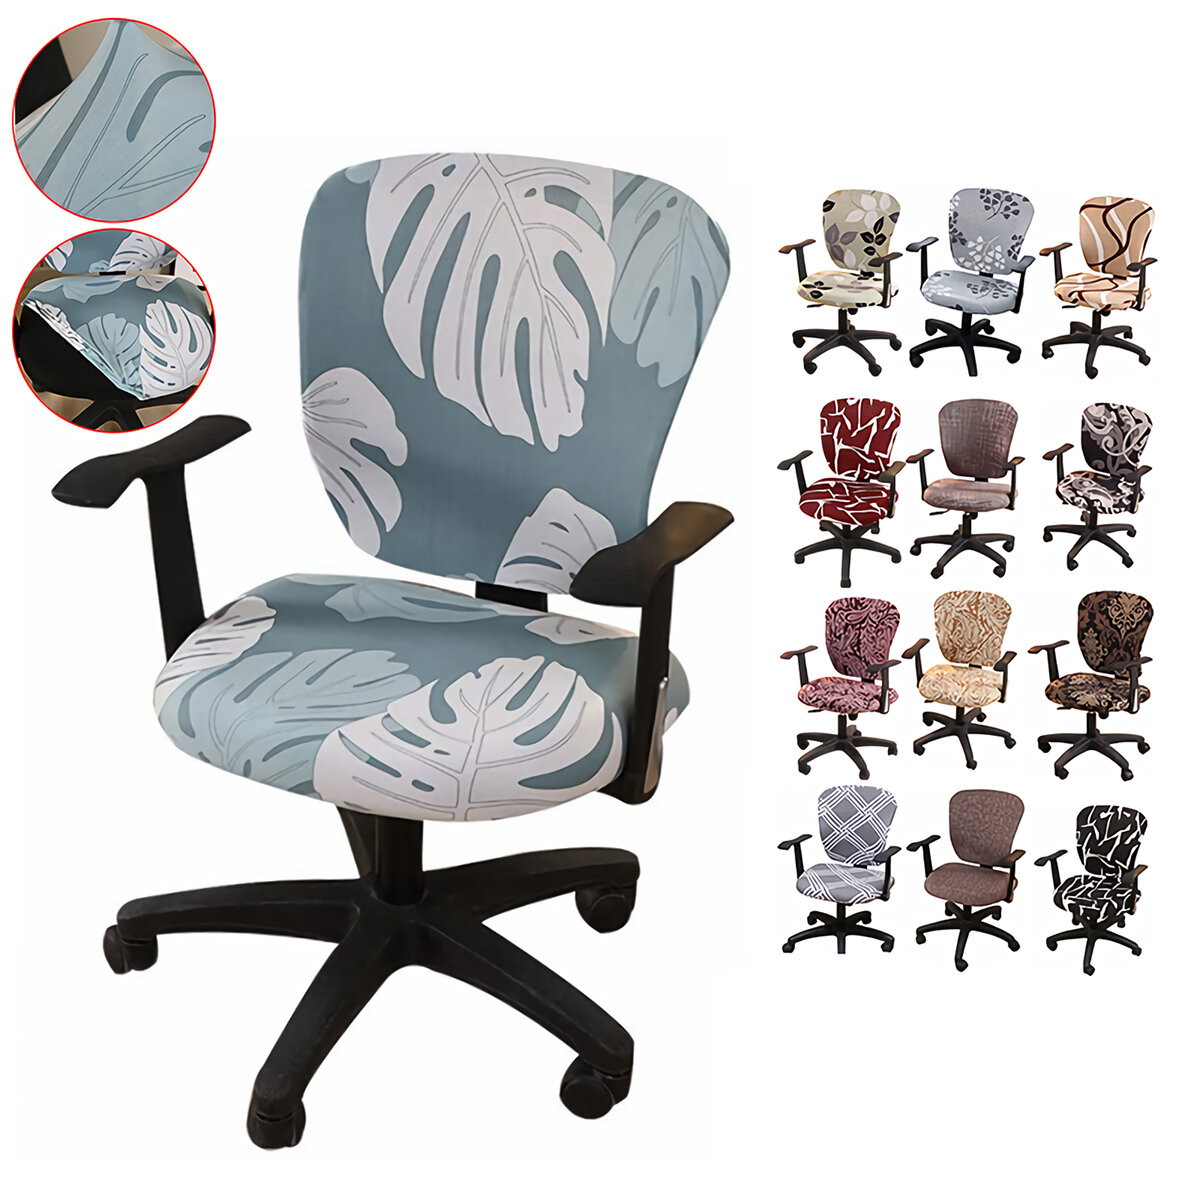 

2Pcs/set Elastic Office Chair Cover Computer Rotating Chair Seat Protector Stretch Armchair Slipcover Home Office Furnit